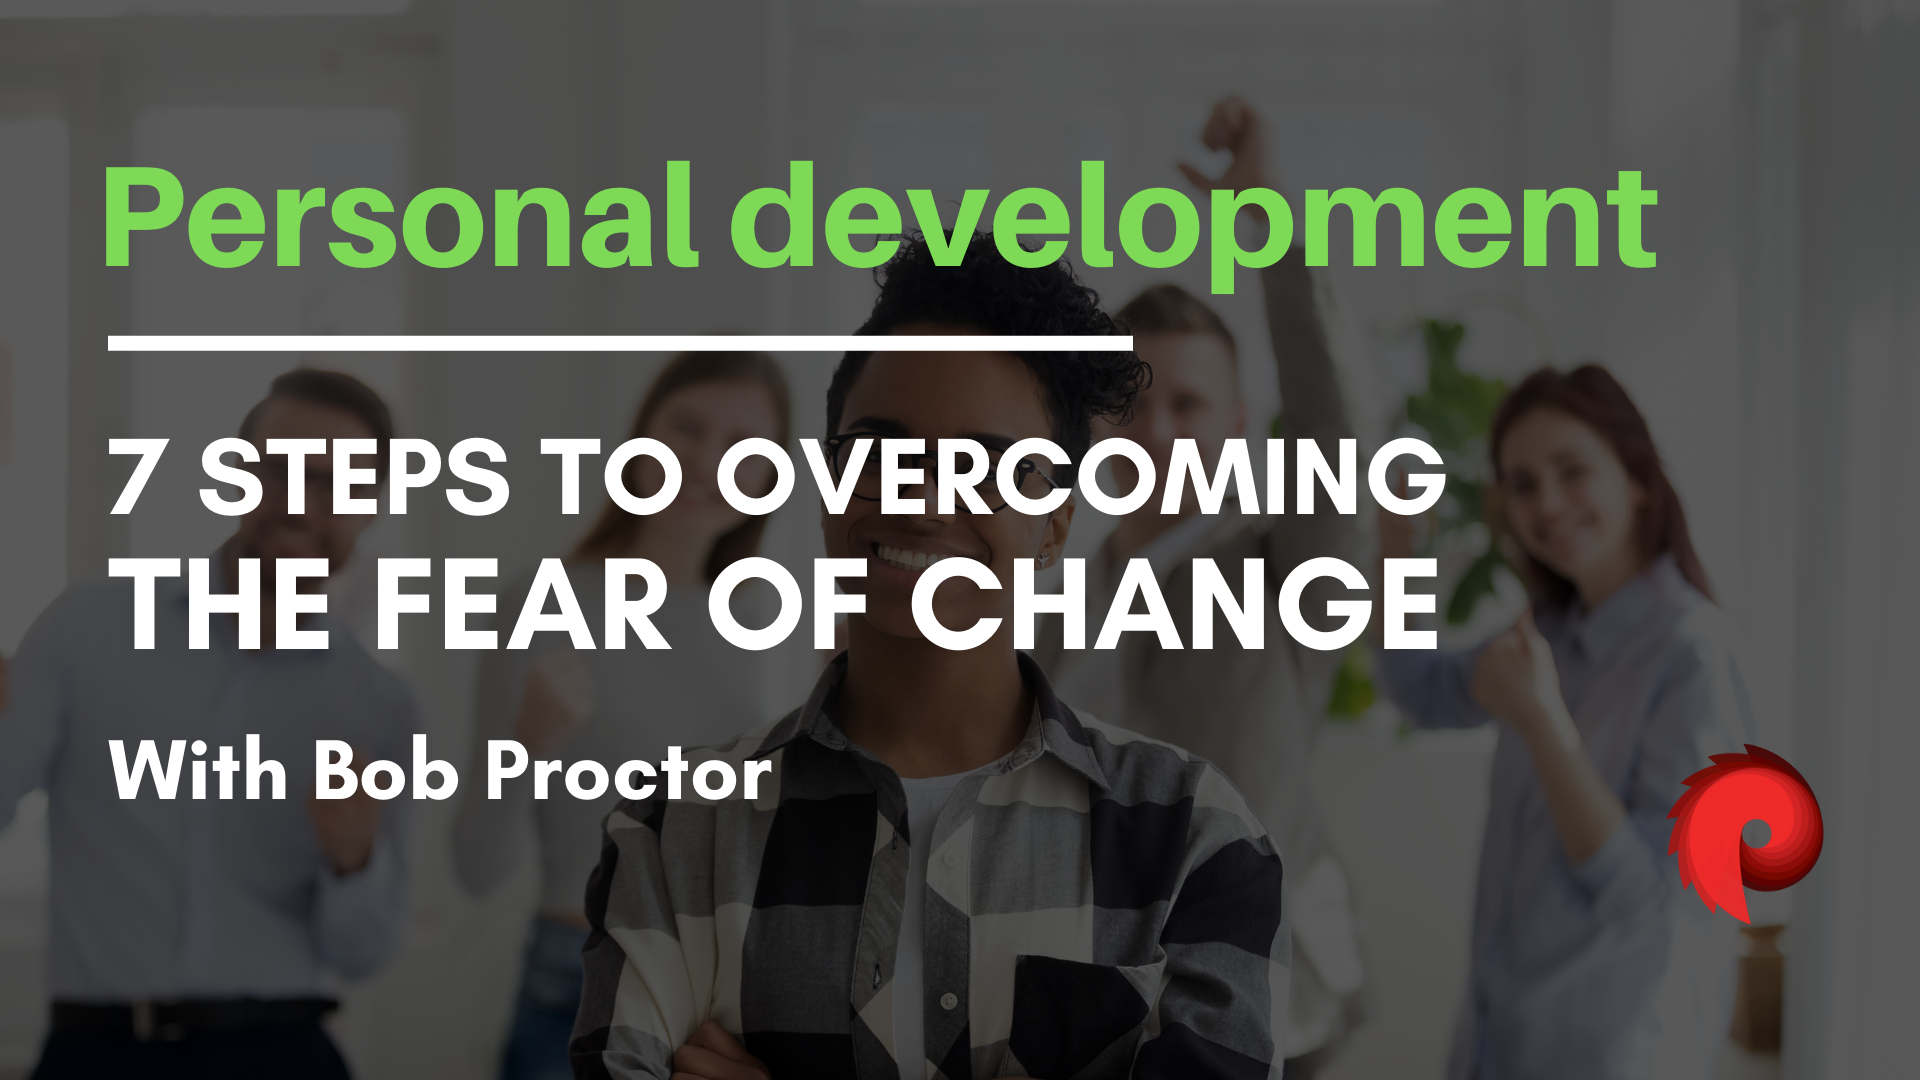 Overcome your fear of change